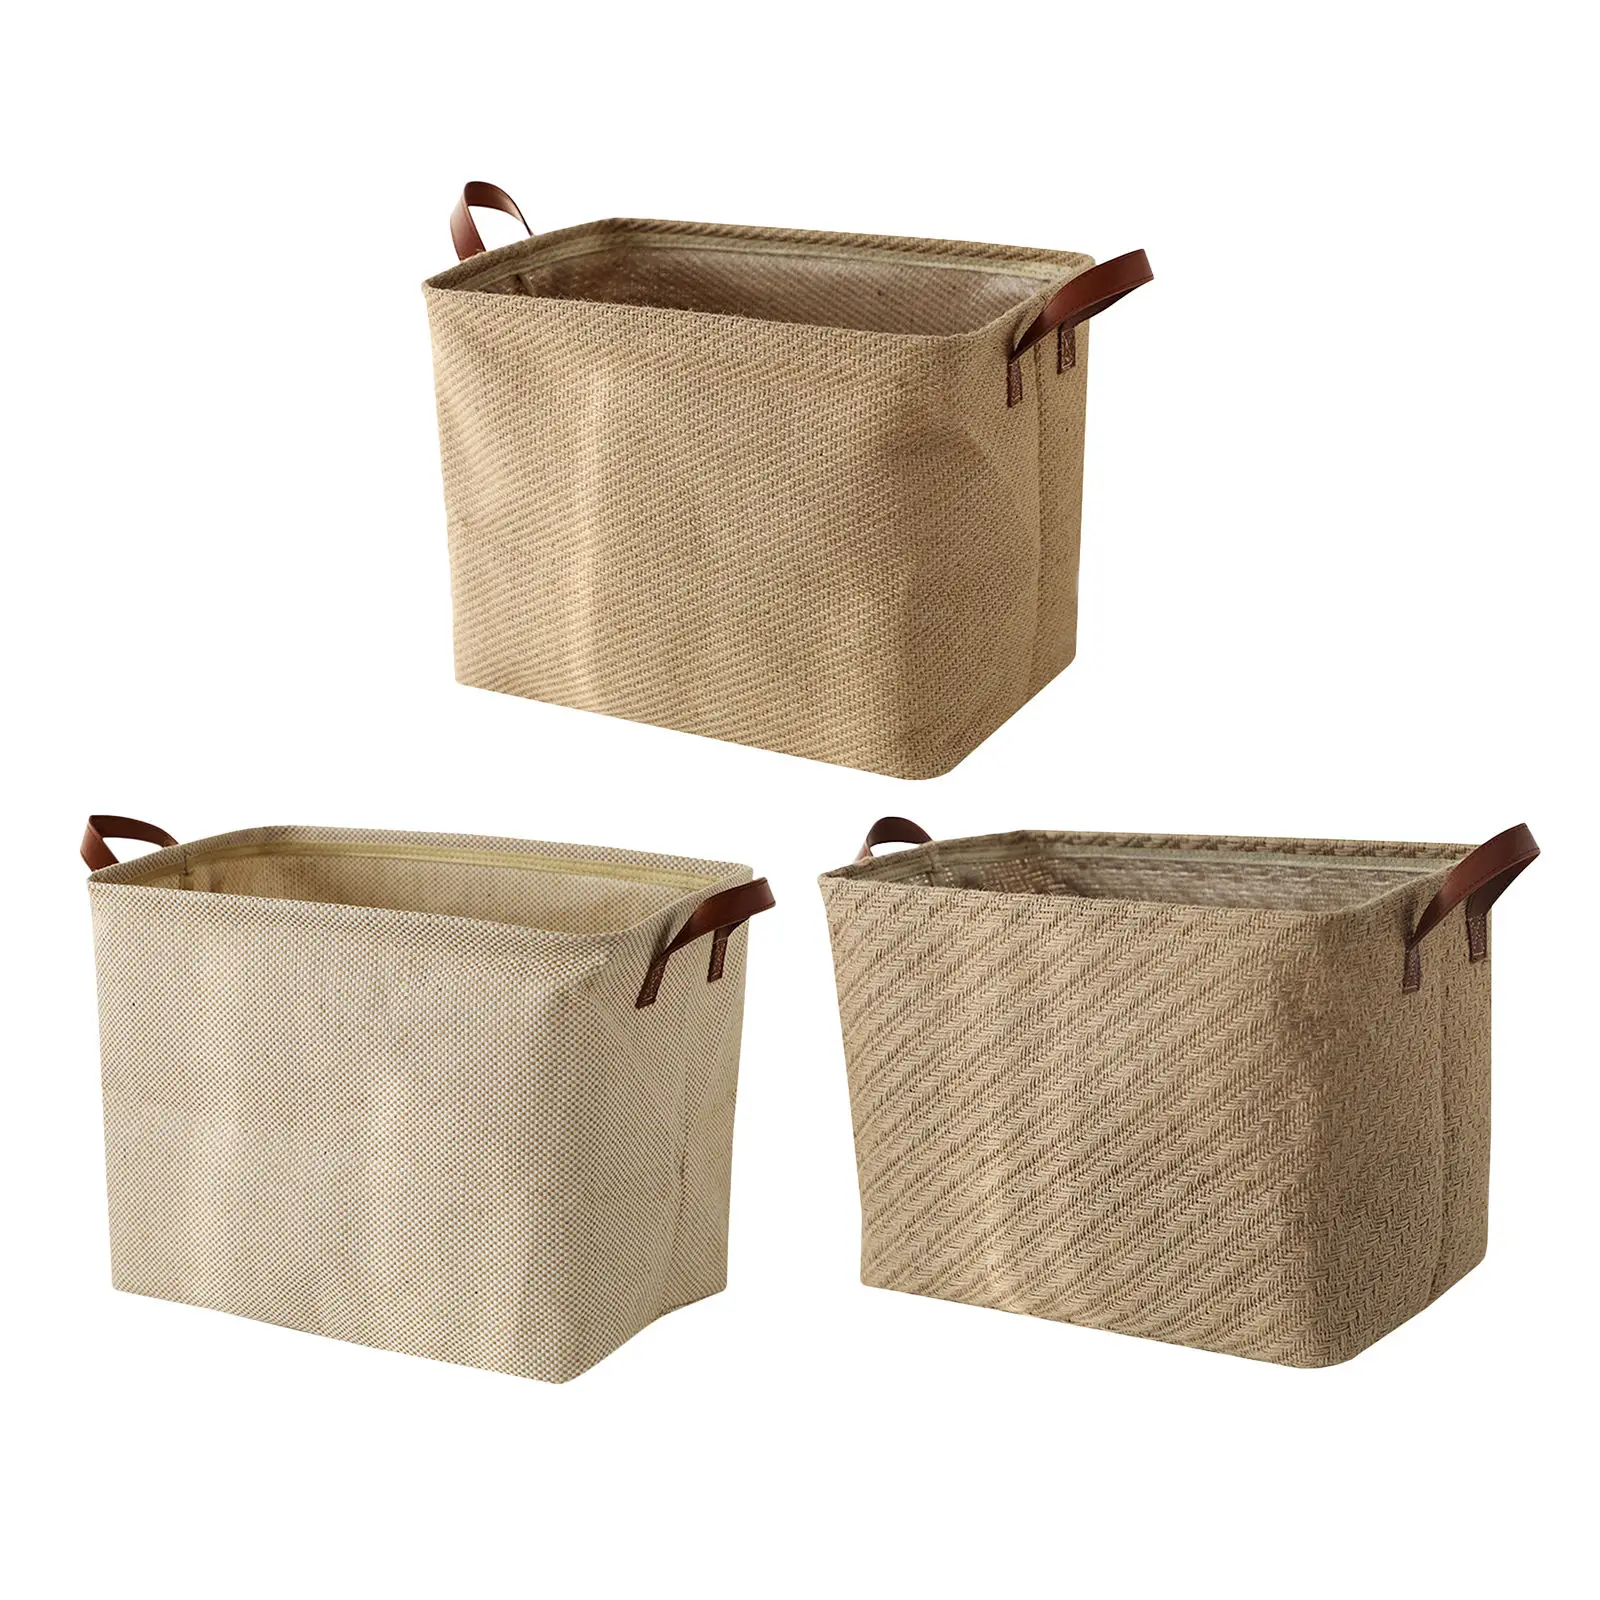 Foldable Storage Basket Decorative Dirty Clothes Organizer Basket with Handles for Home Dorm Office Closet Laundry Basket